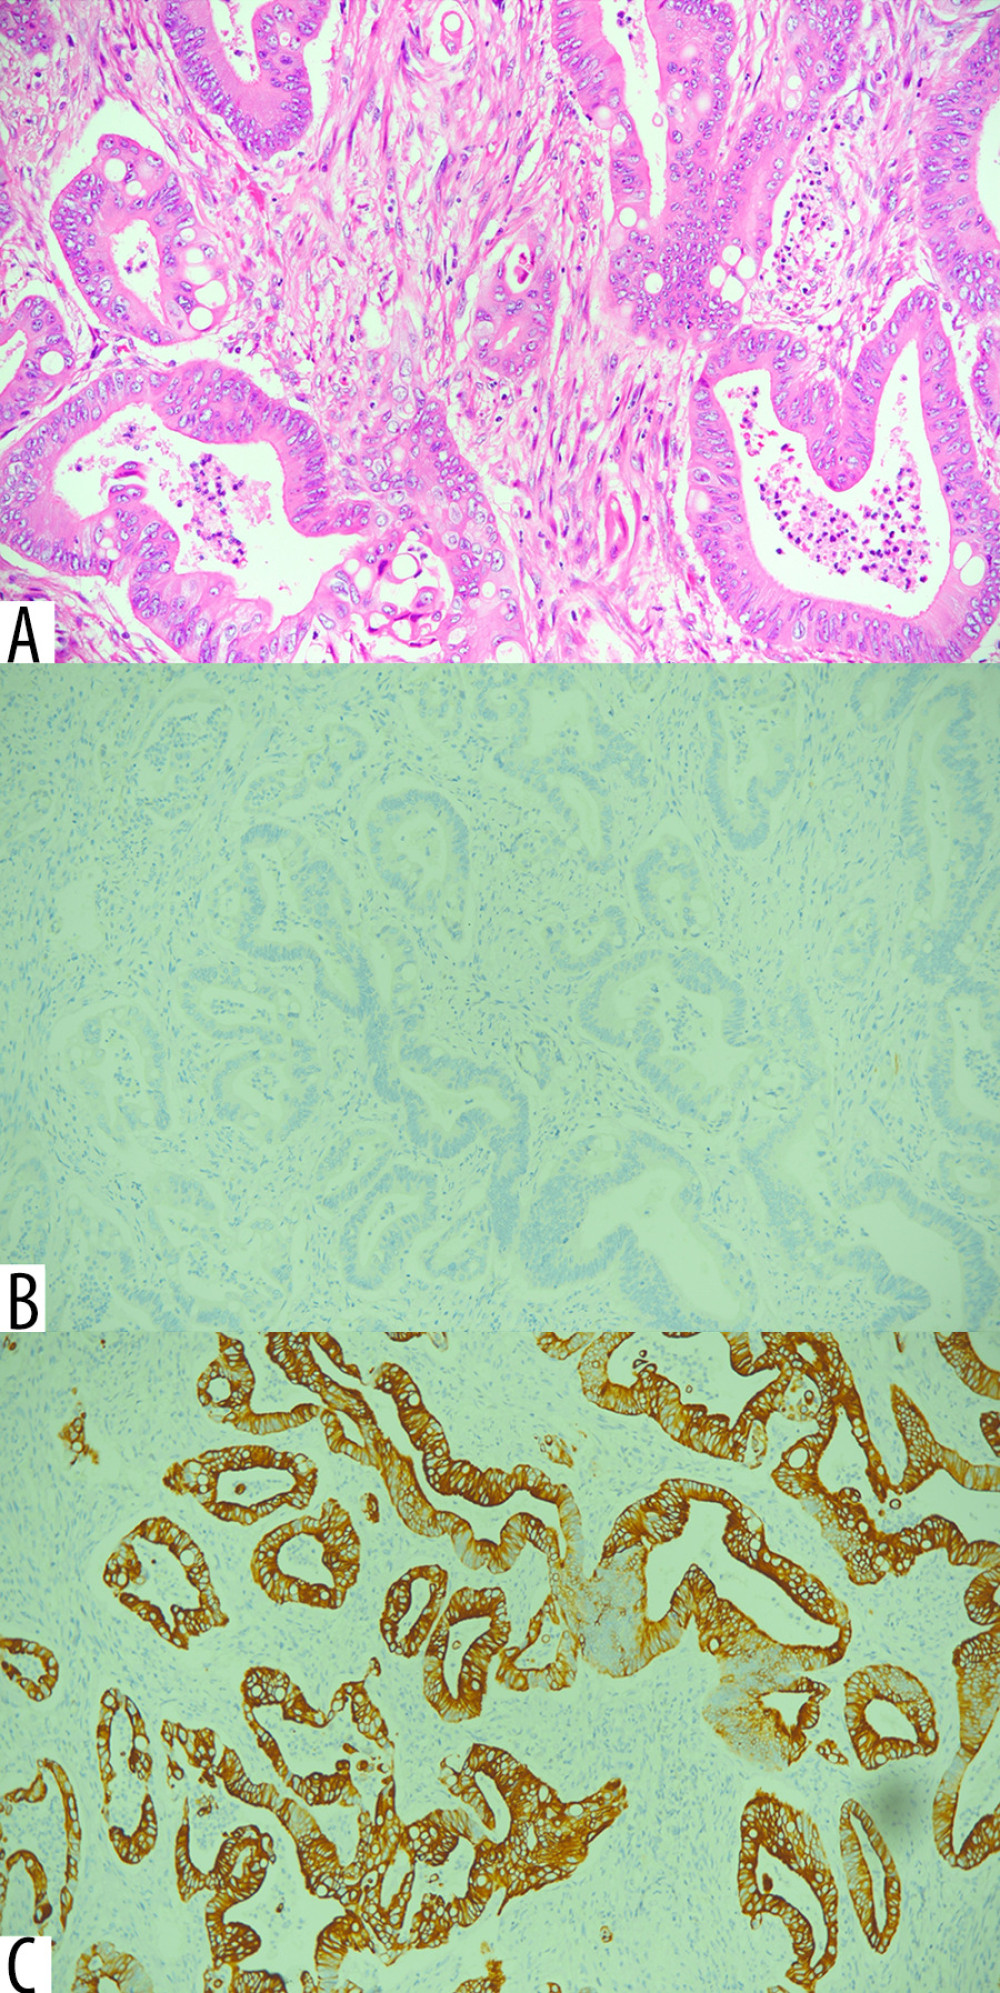 Histopathological and immunohistochemical findings of the gastric mass. (A) Moderately differentiated adenocarcinoma on the hematoxylin and eosin stain (H and E ×60). (B) Negative cytokeratin 20 (CK20) (×60). (C) Positive cytokeratin 7 (CK7) (×60).